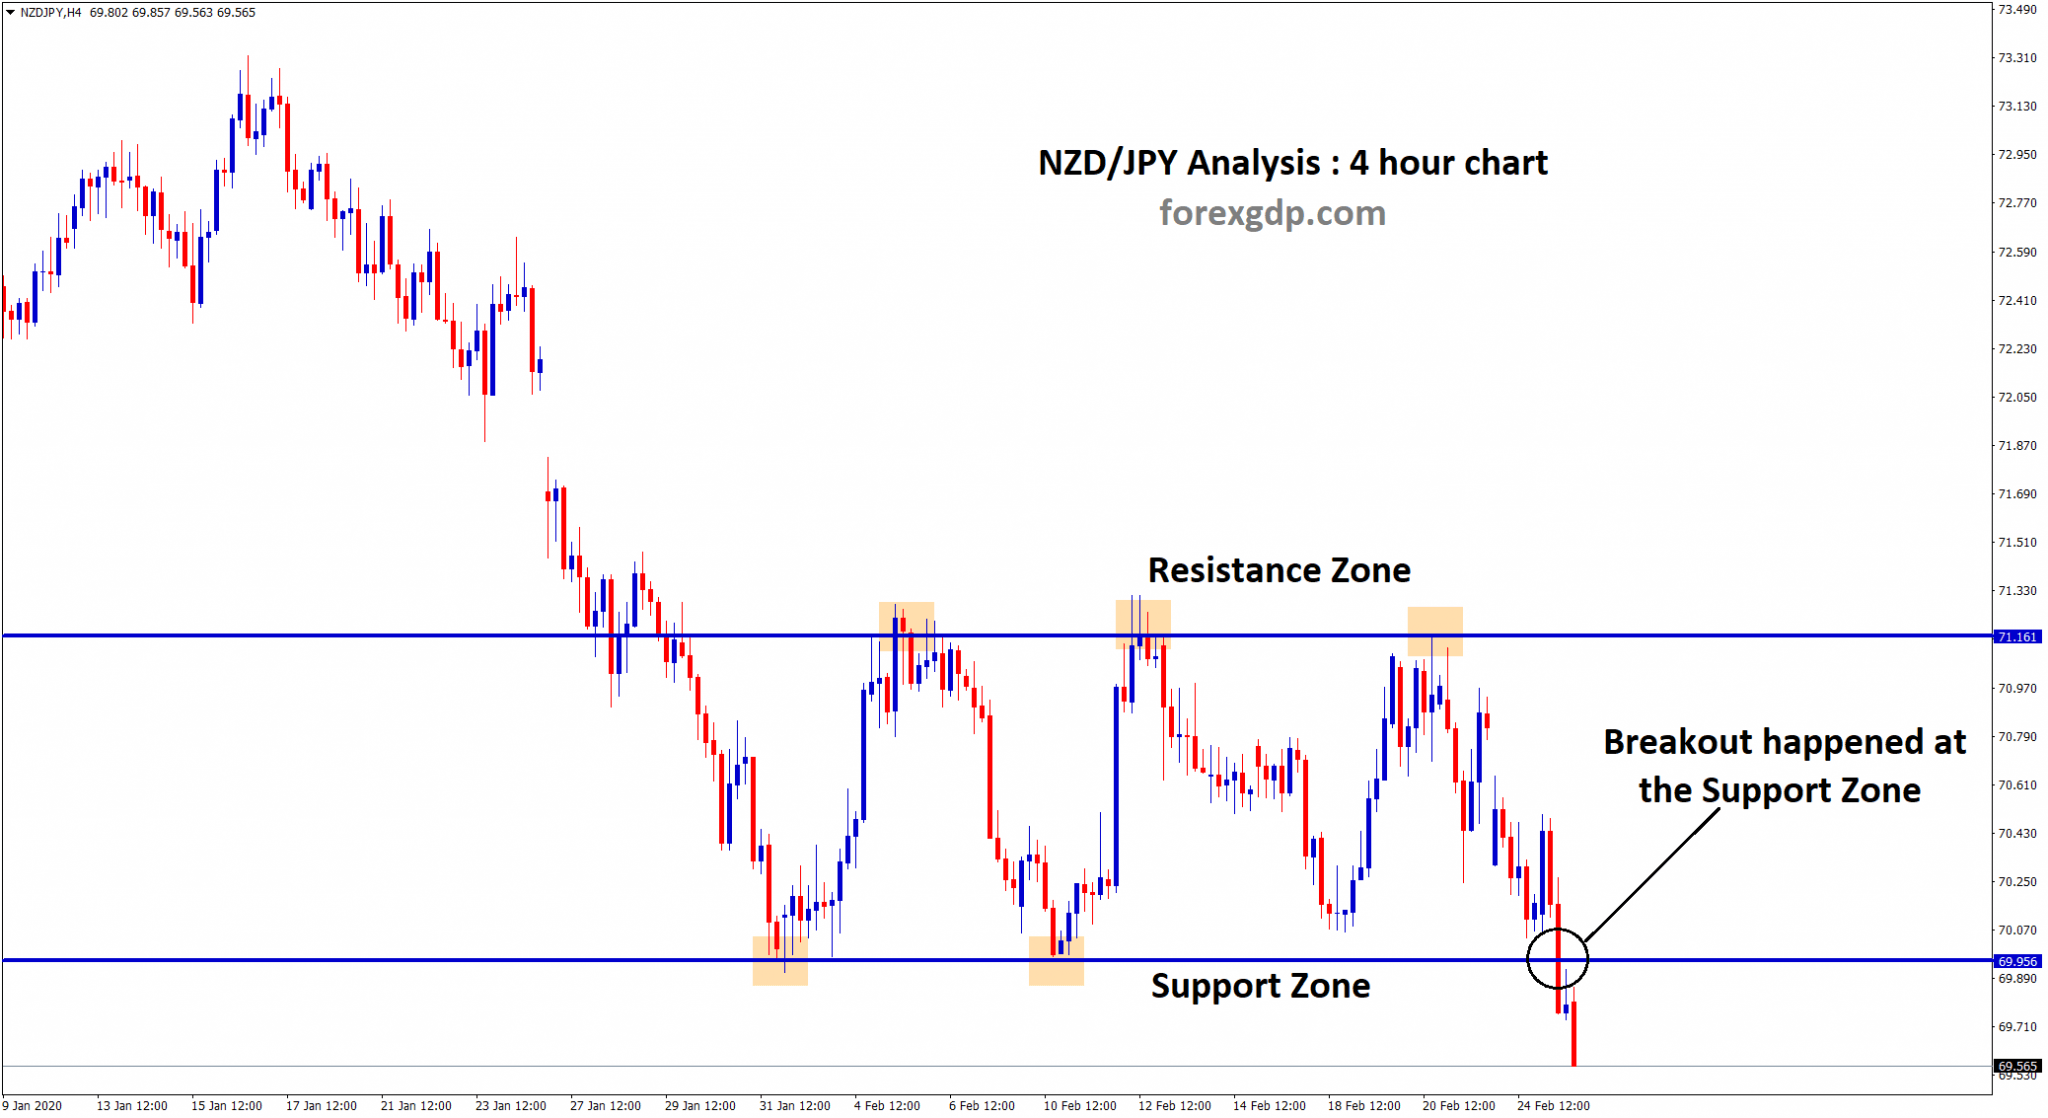 breakout happened at nzd jpy support zone